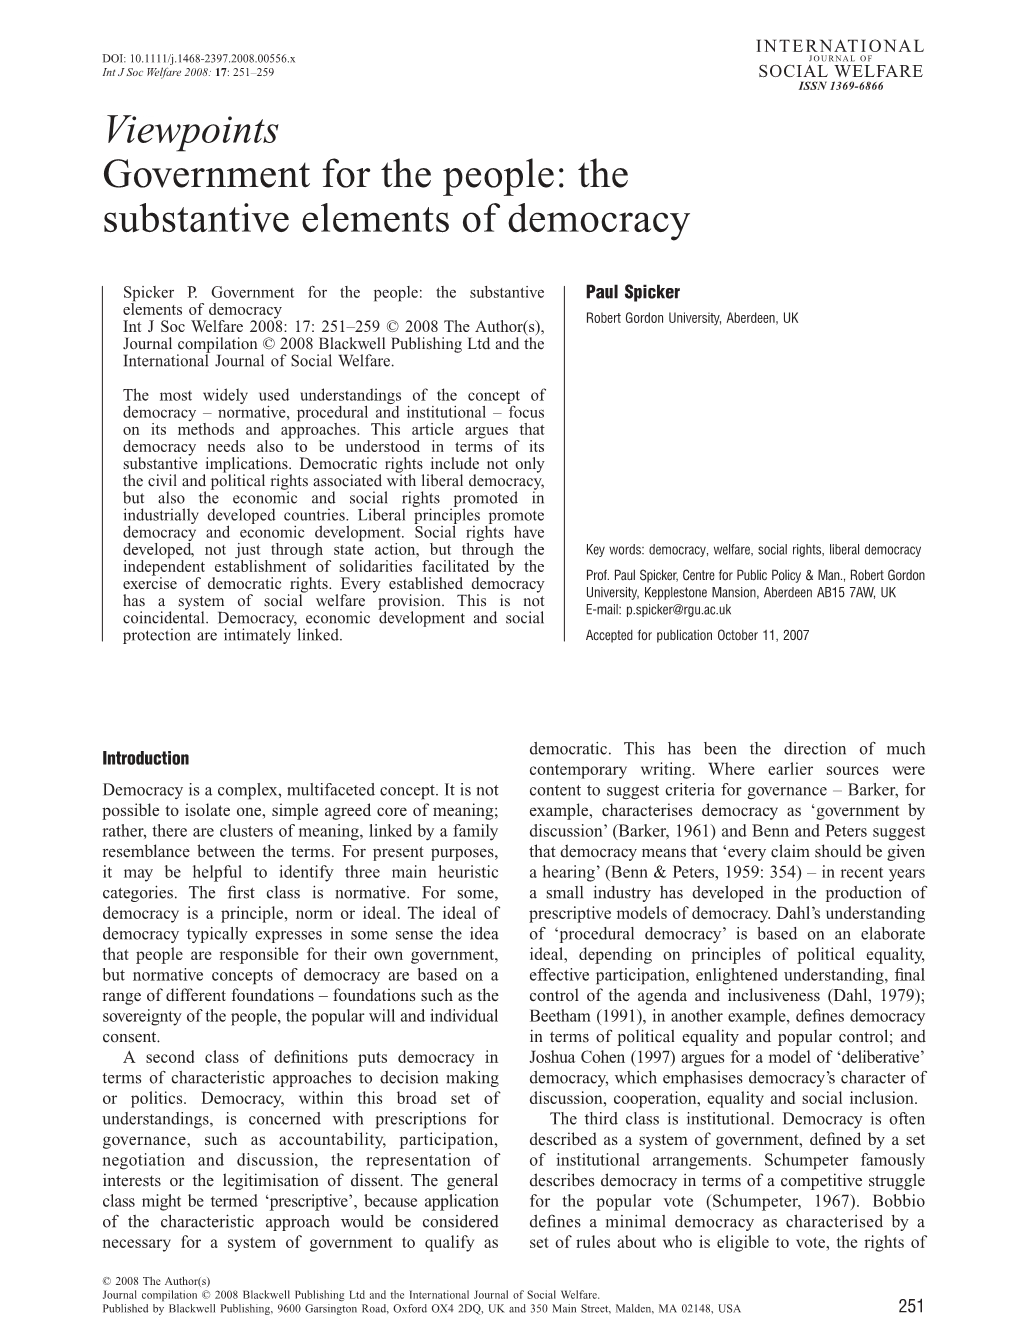 Government for the People: the Substantive Elements of Democracy